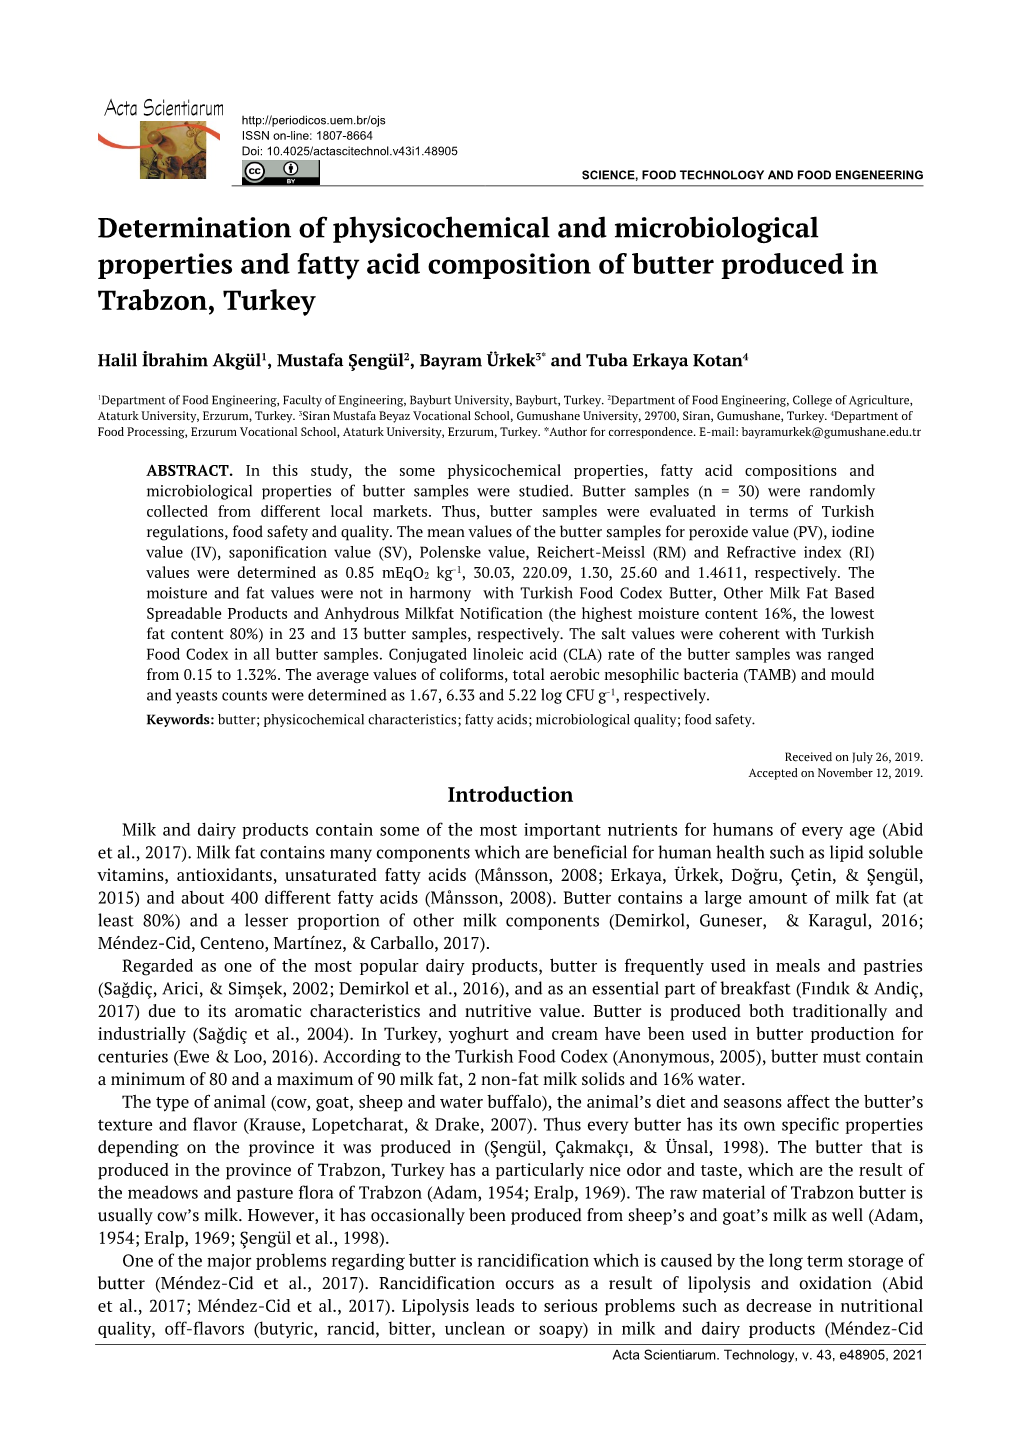 Determination of Physicochemical and Microbiological Properties and Fatty Acid Composition of Butter Produced in Trabzon, Turkey